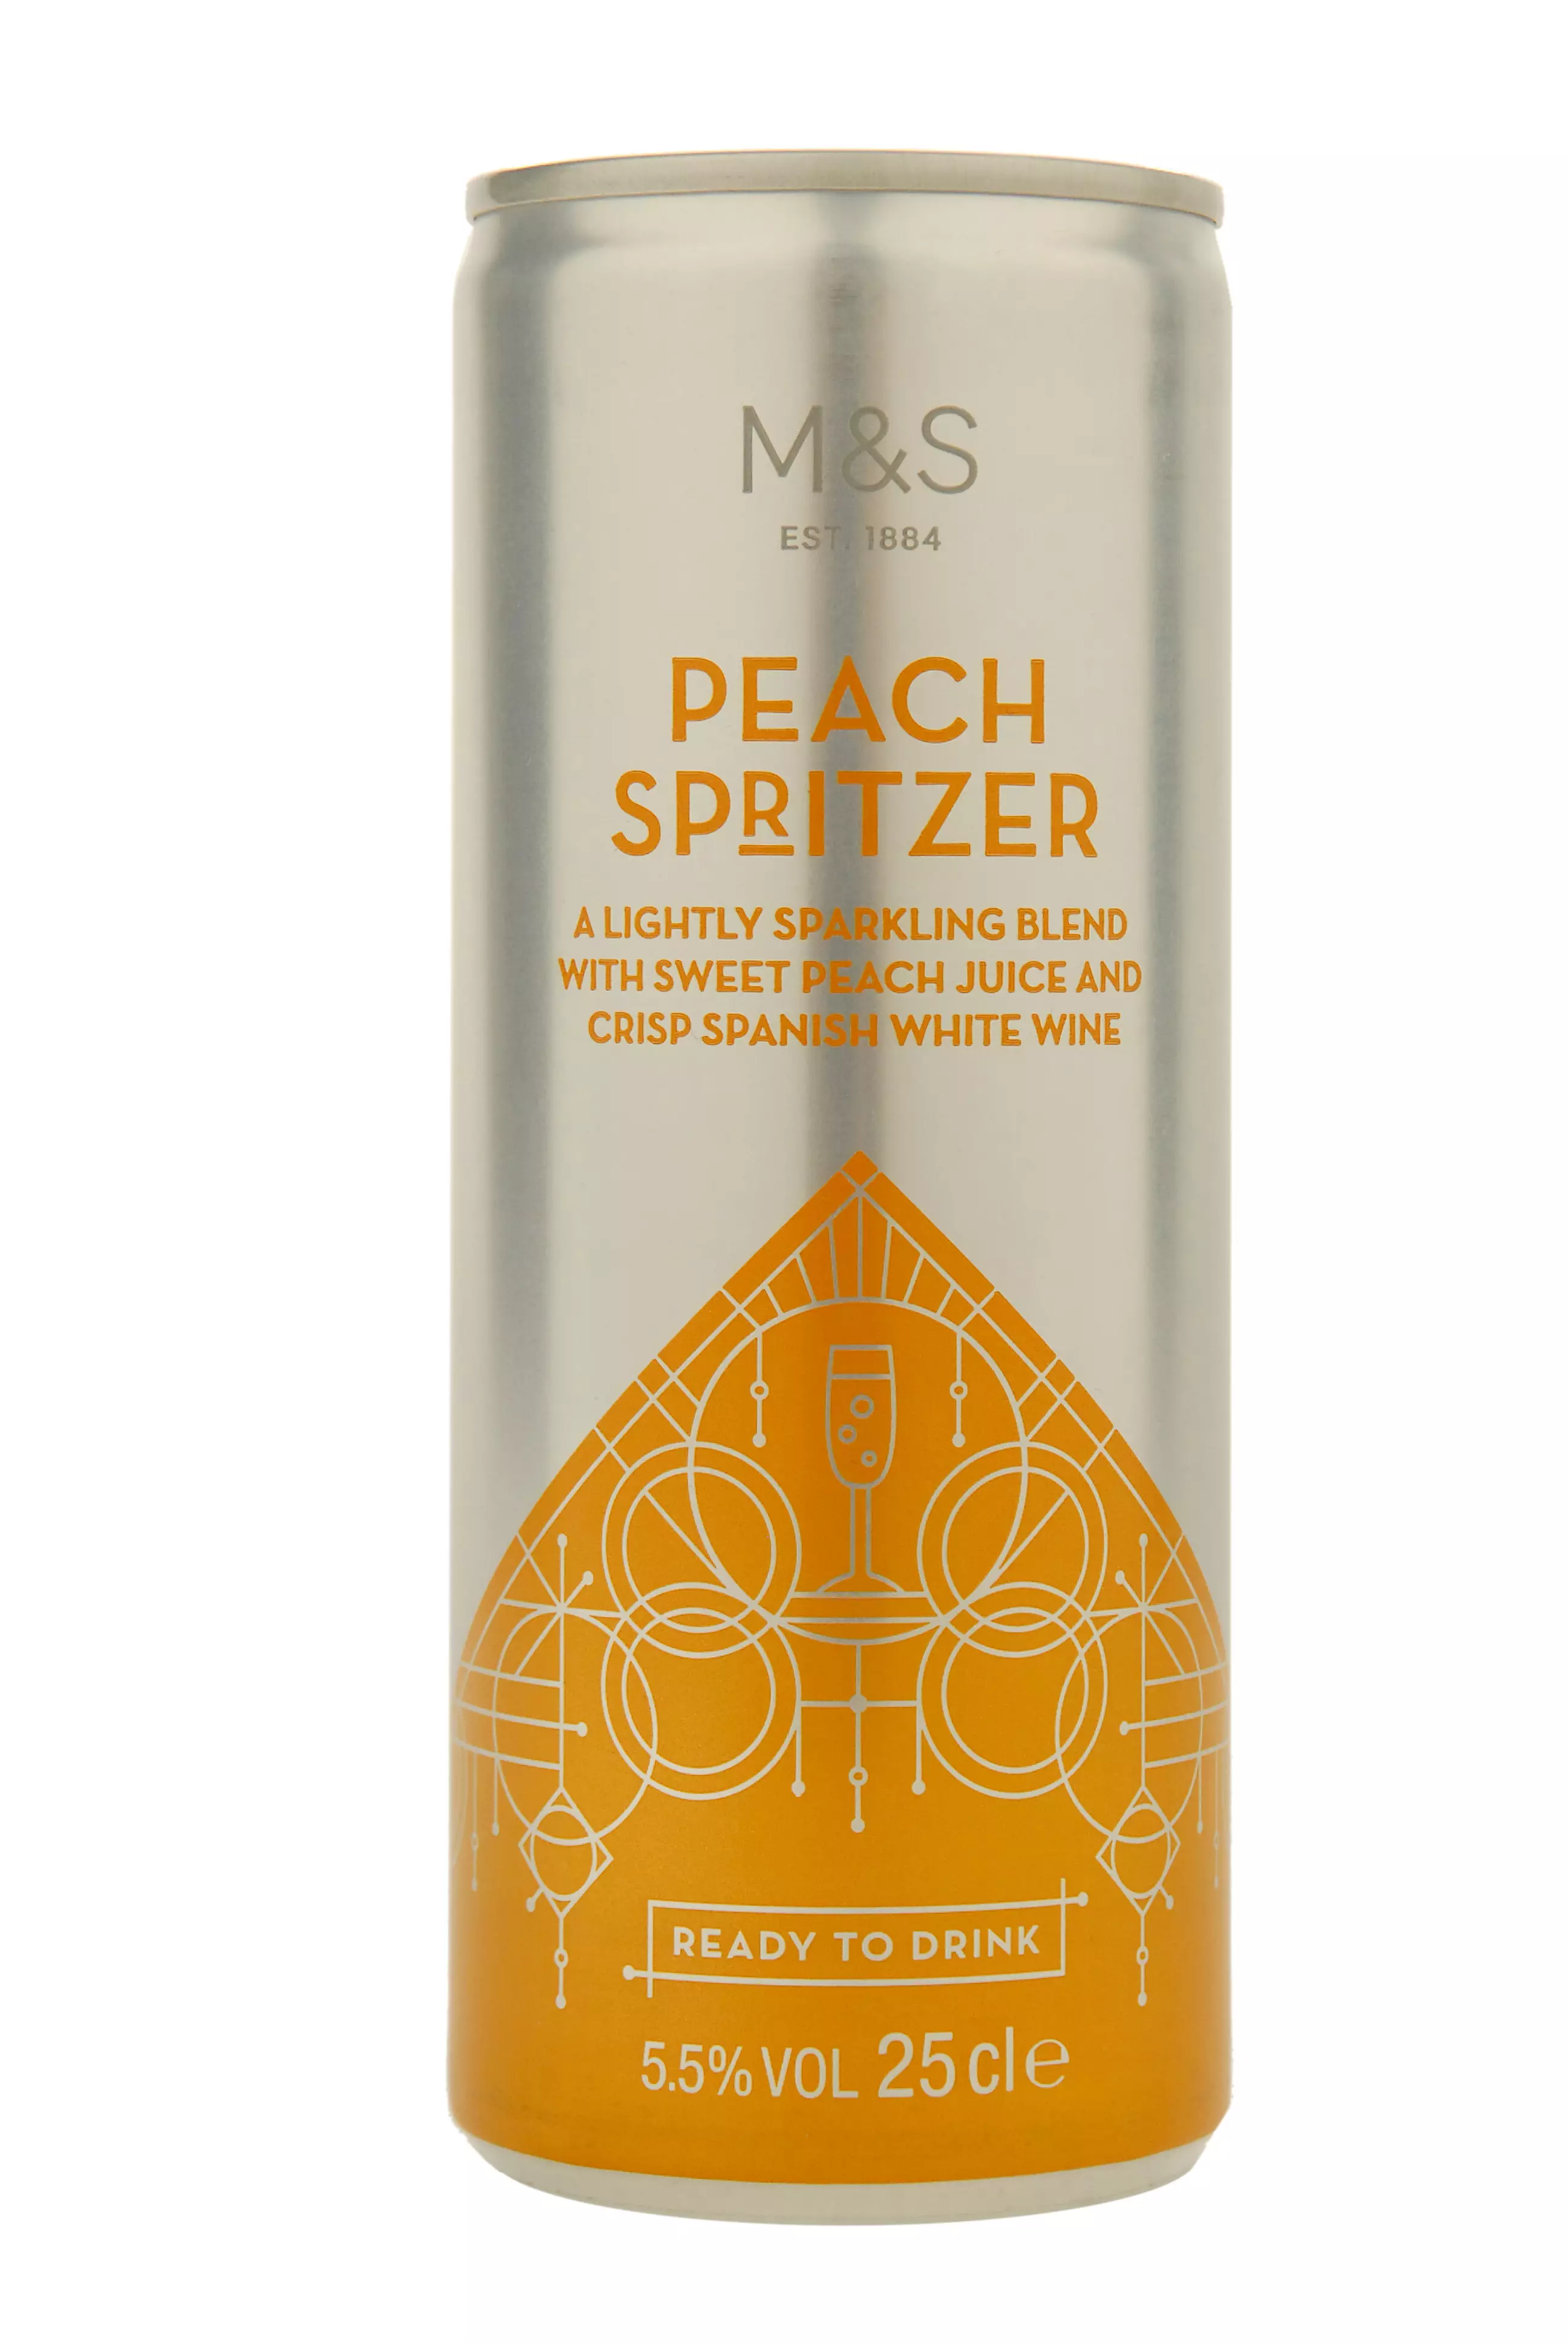 The retailer described the Peach Spritzer as a drink to get "the party started".